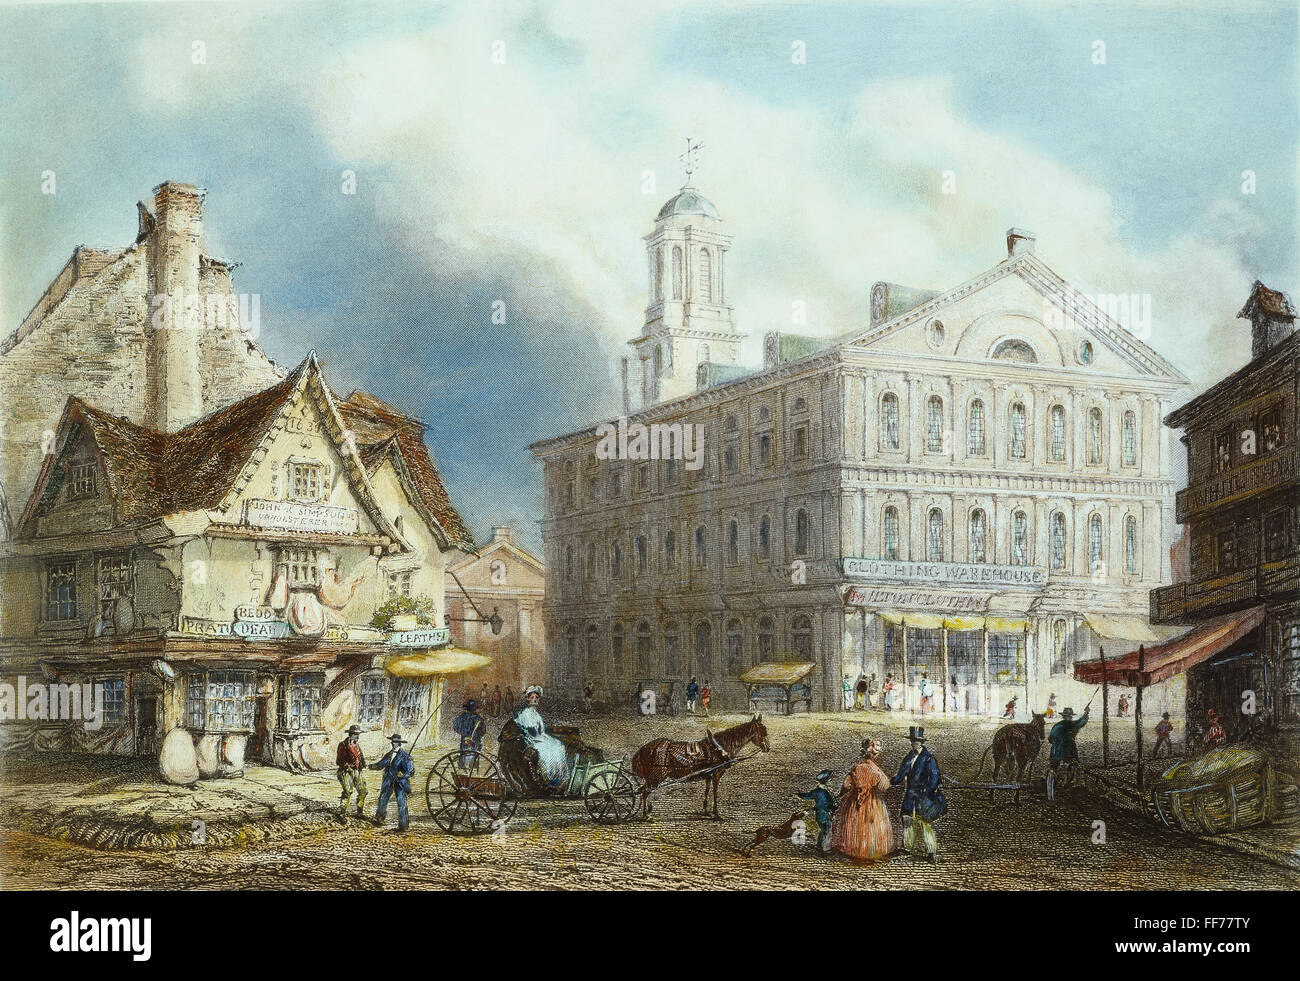 BOSTON: FANEUIL HALL. /nLine engraving, 1838. Stock Photo